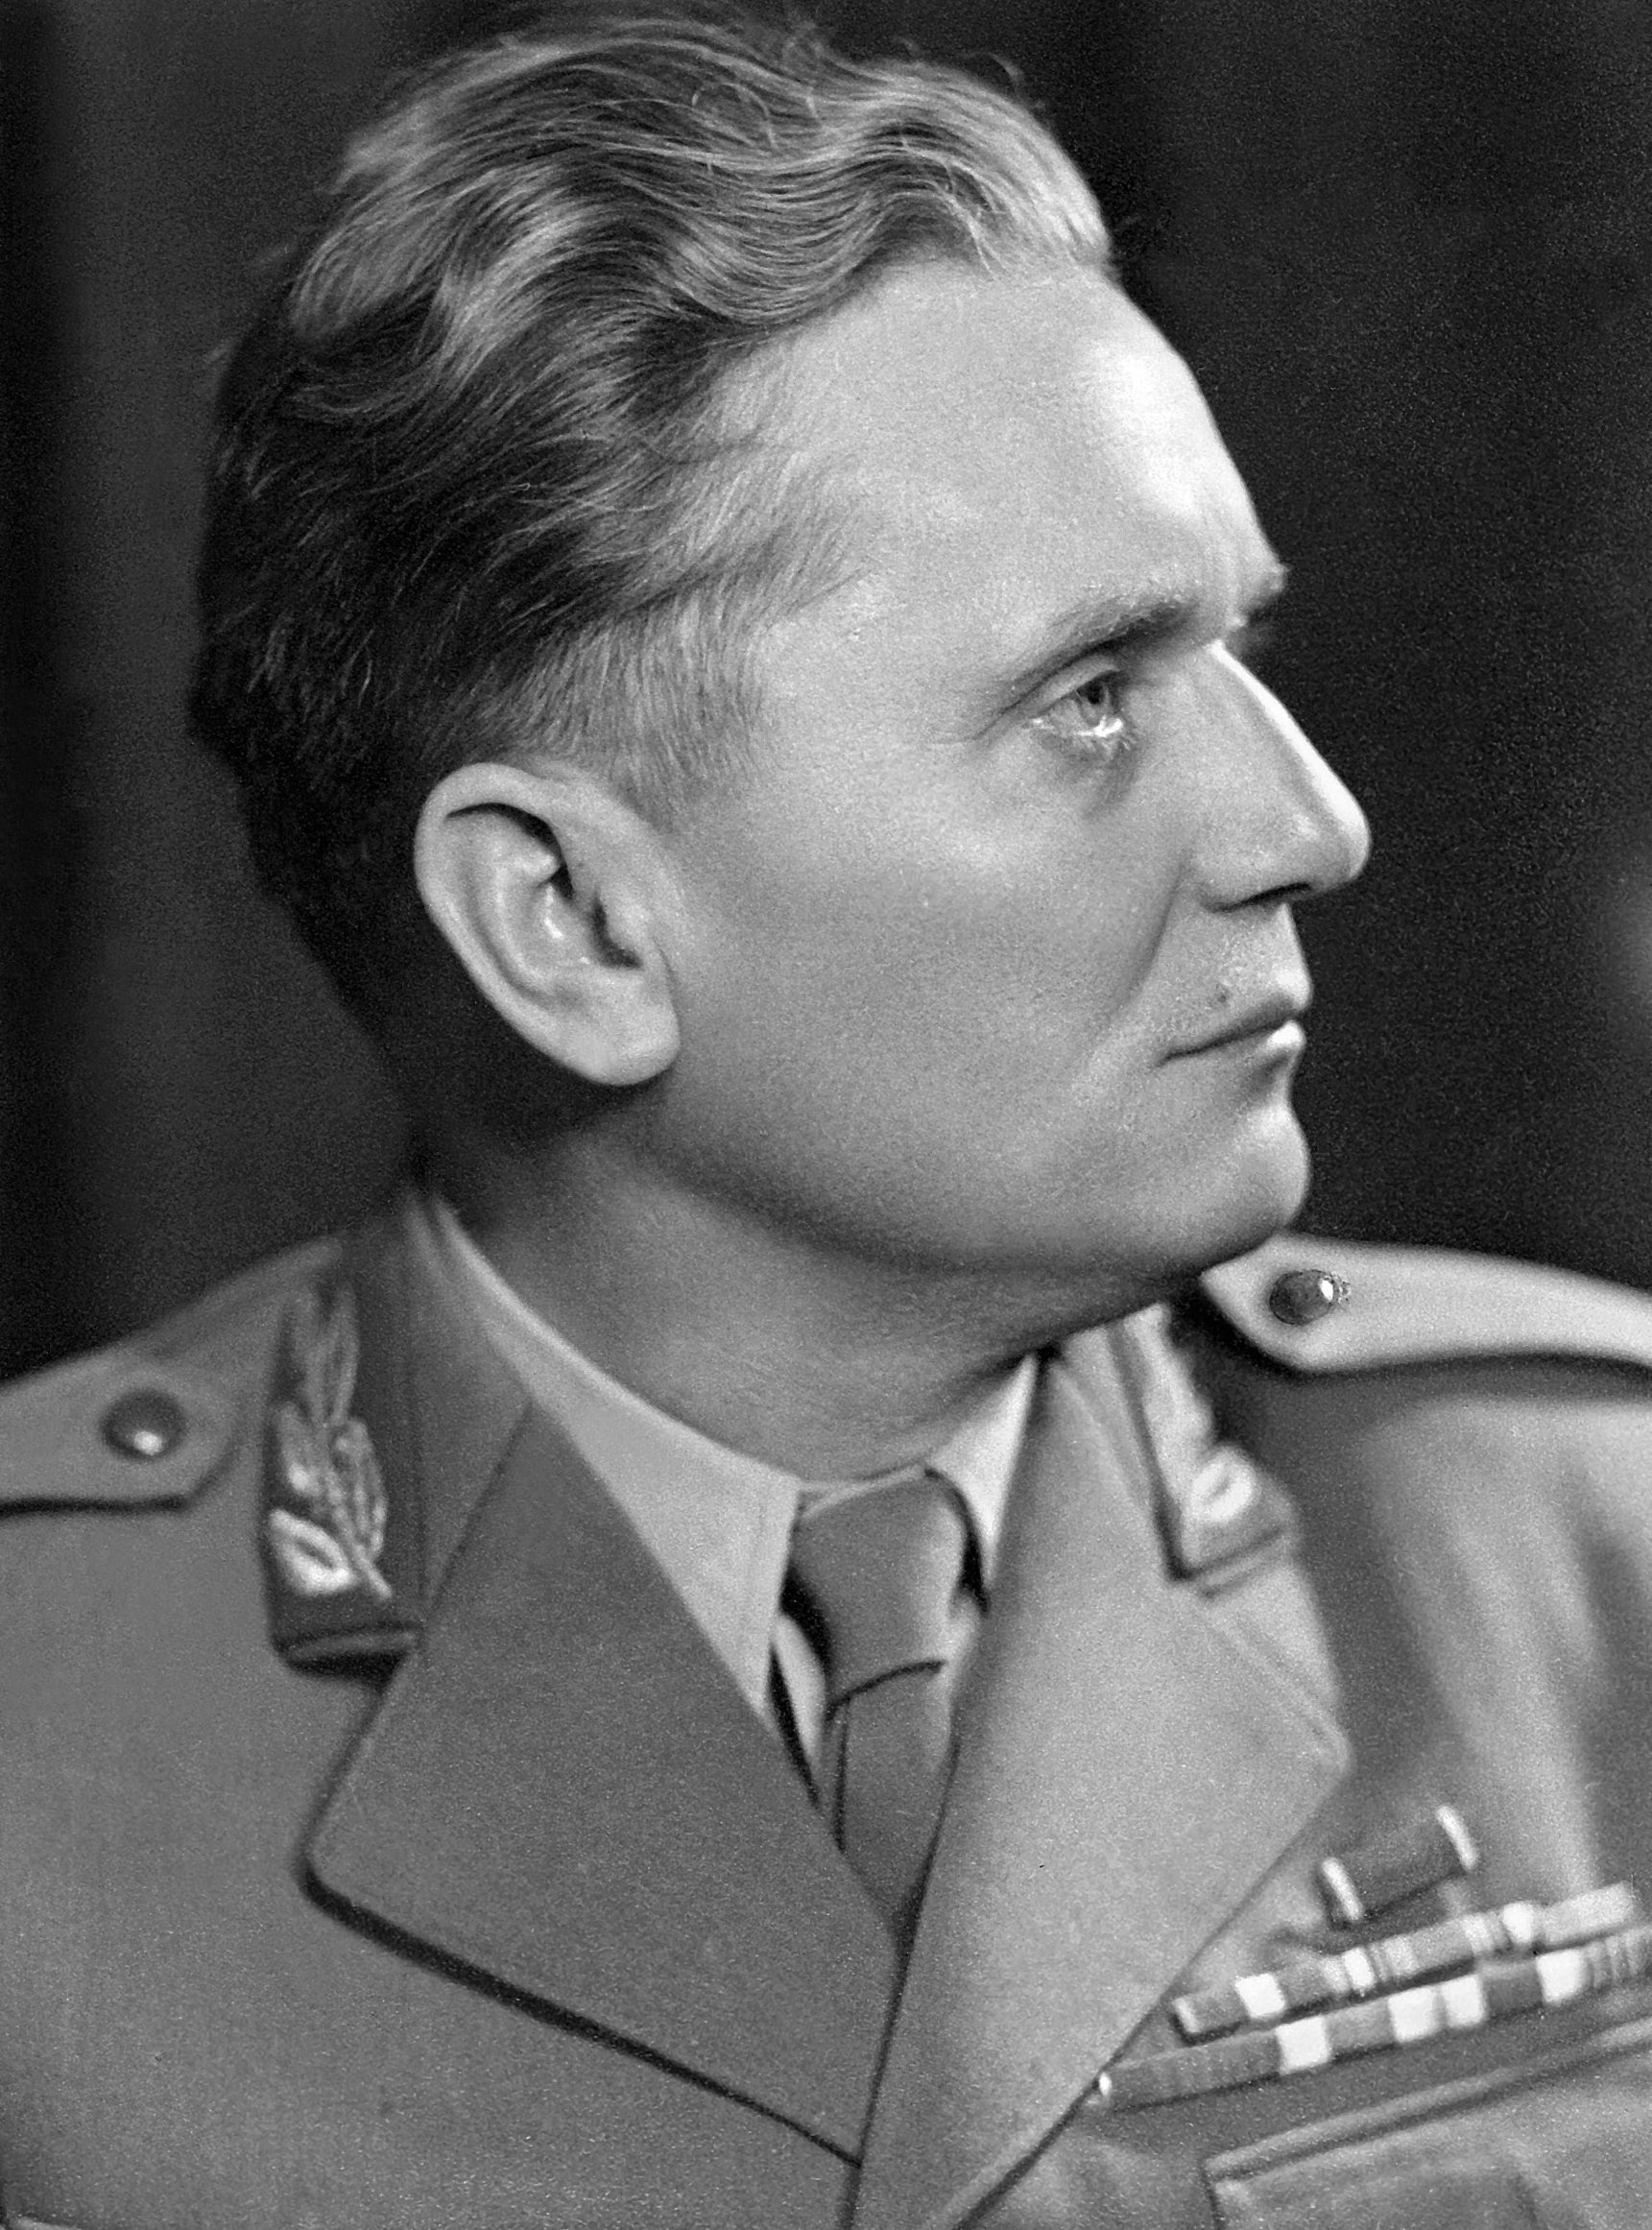 (FILES) In this file photo taken on June 29, 1948 Yugoslav President Marshall Josip Broz Tito poses for a portrait, when the Yugoslav Communist Party was expelled by the Communist Information Bureau (Cominform) meeting in Bucarest because of Tito's defiance of Soviet supremacy. - Josip Broz Tito, who died 40 years ago at the age of 88, was both revered and feared as the lifelong leader of former Yugoslavia, a country that later unravelled without his unifying presence. (Photo by - / AFP)